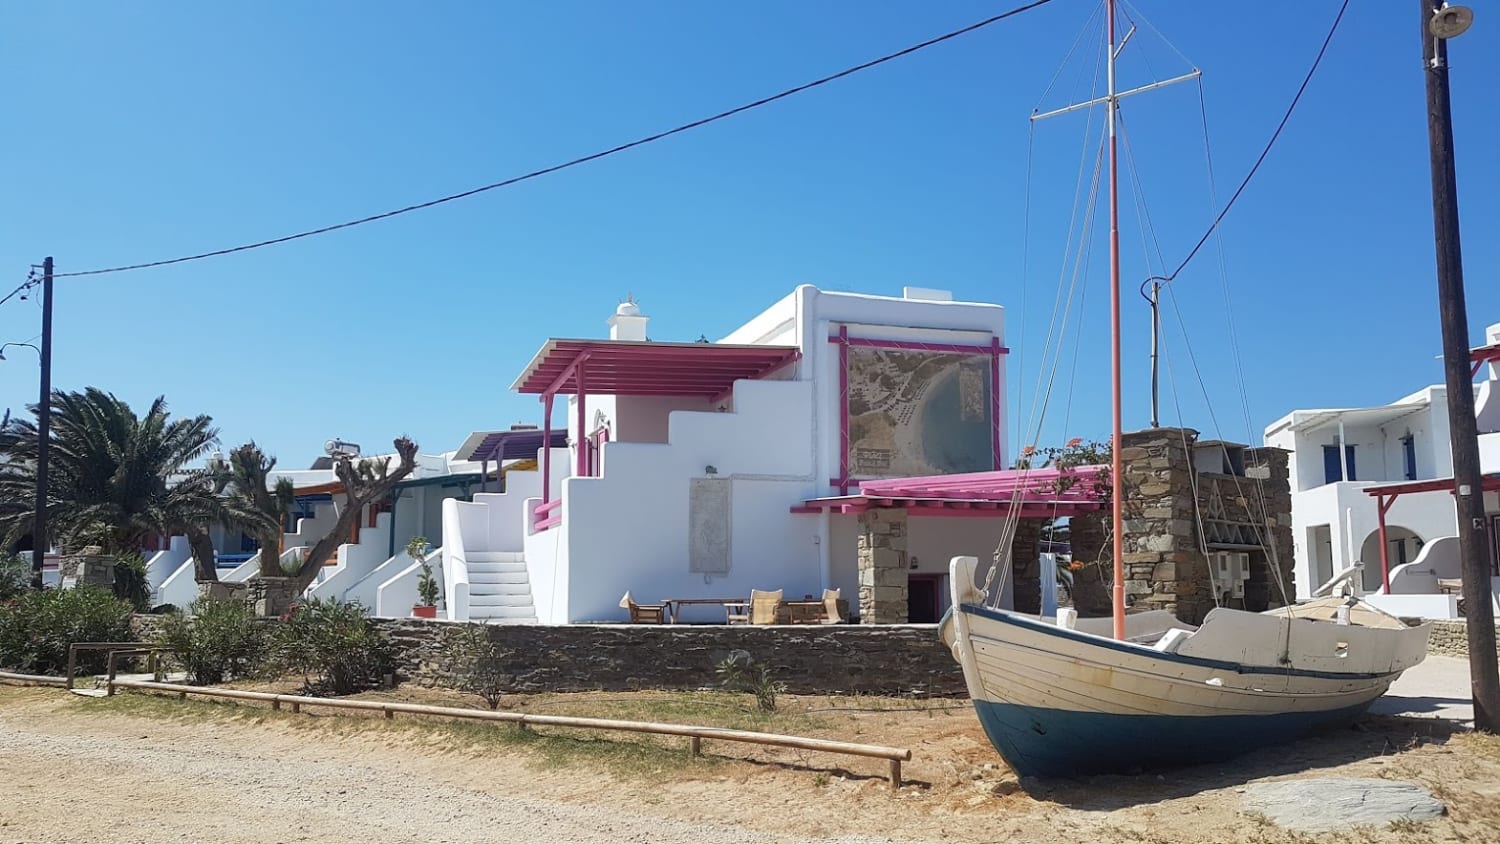 Tinos Hotels Guides - Where to stay in Tinos Greece